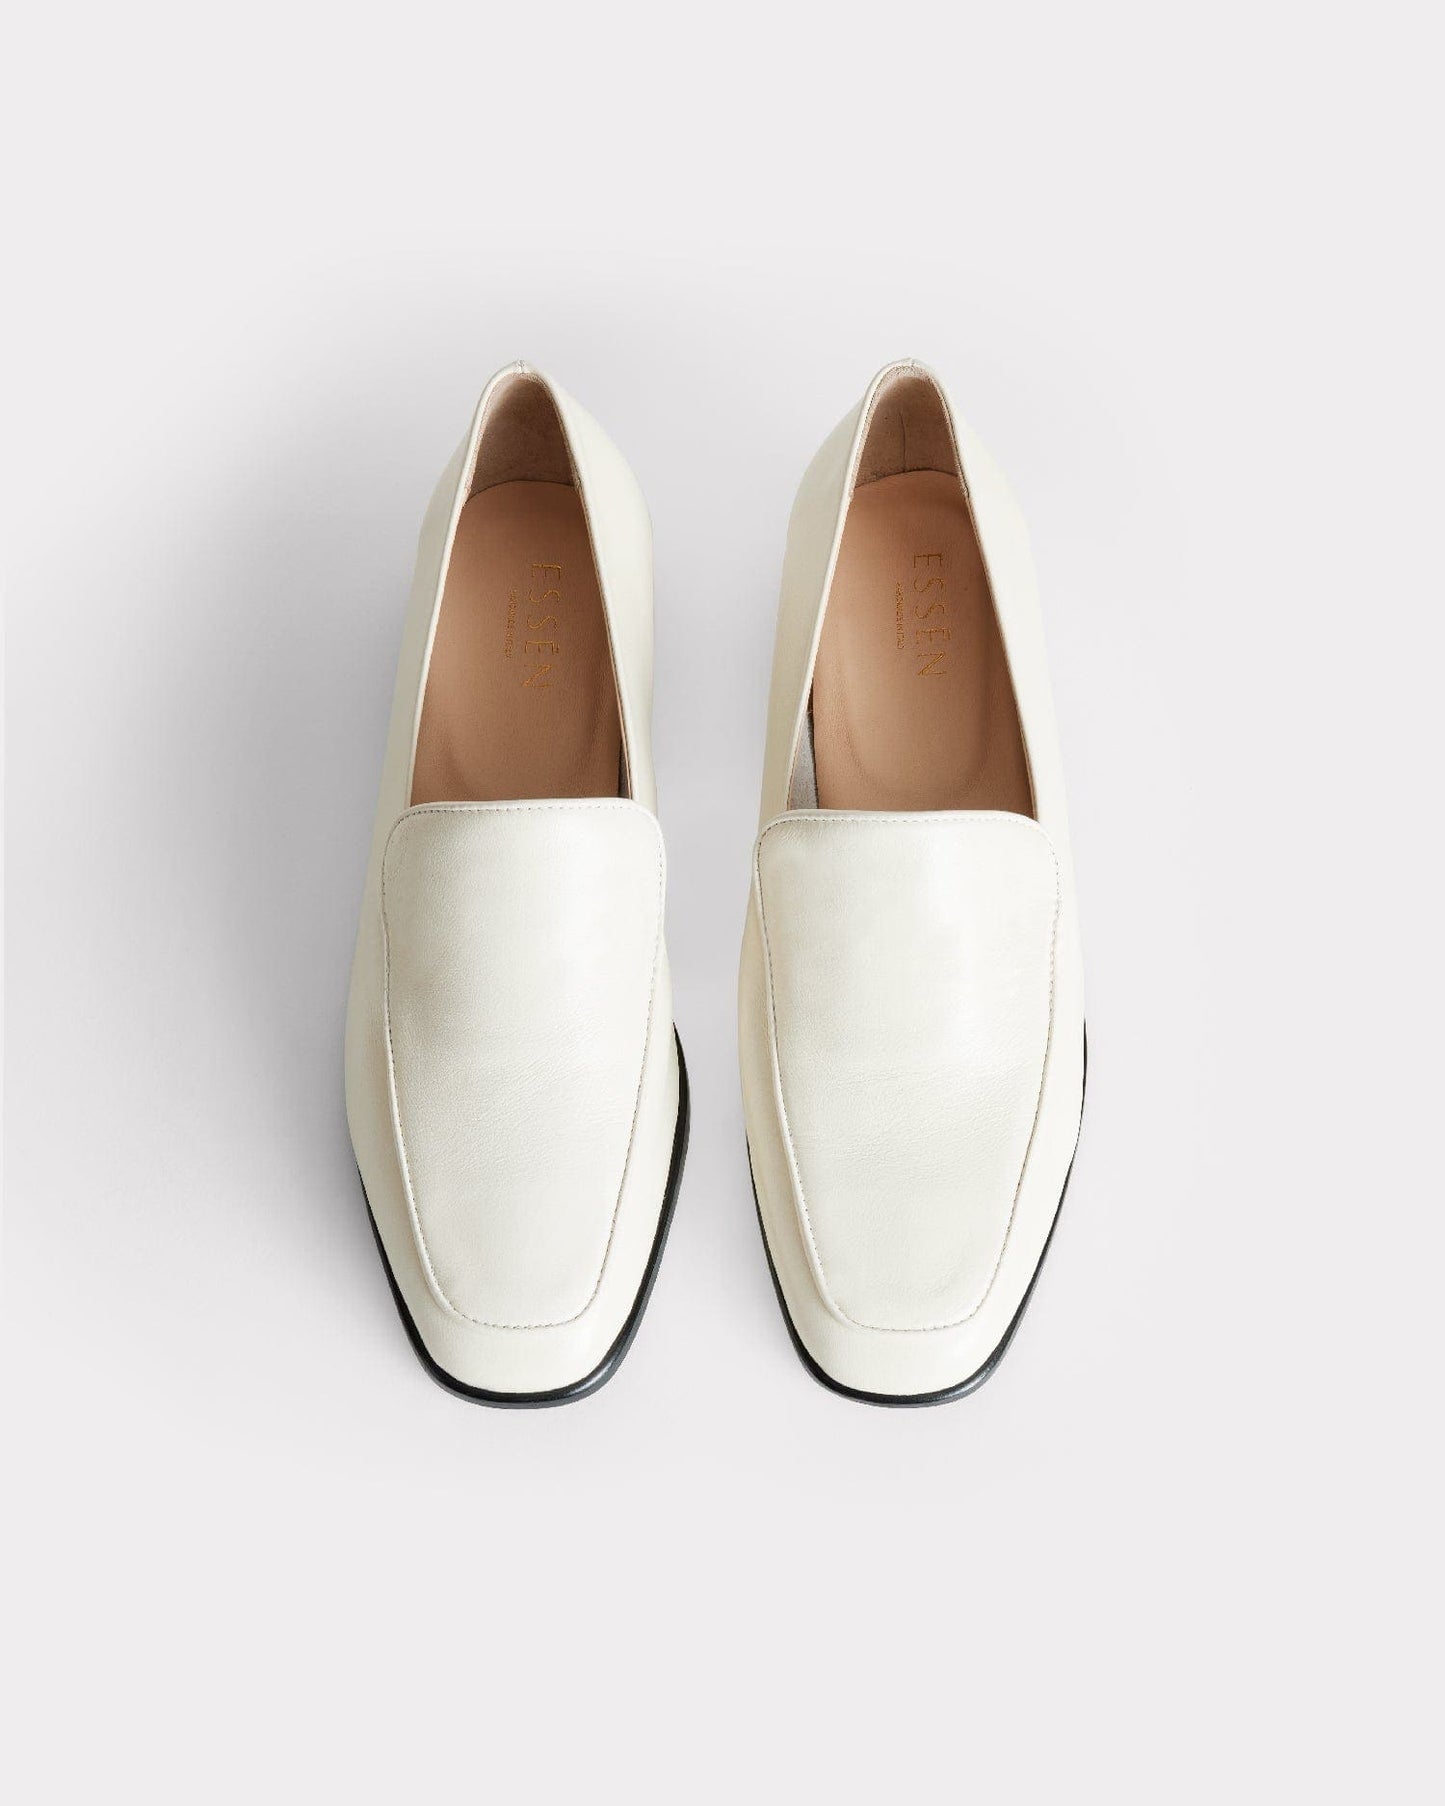 The Modern Moccasin - Butter